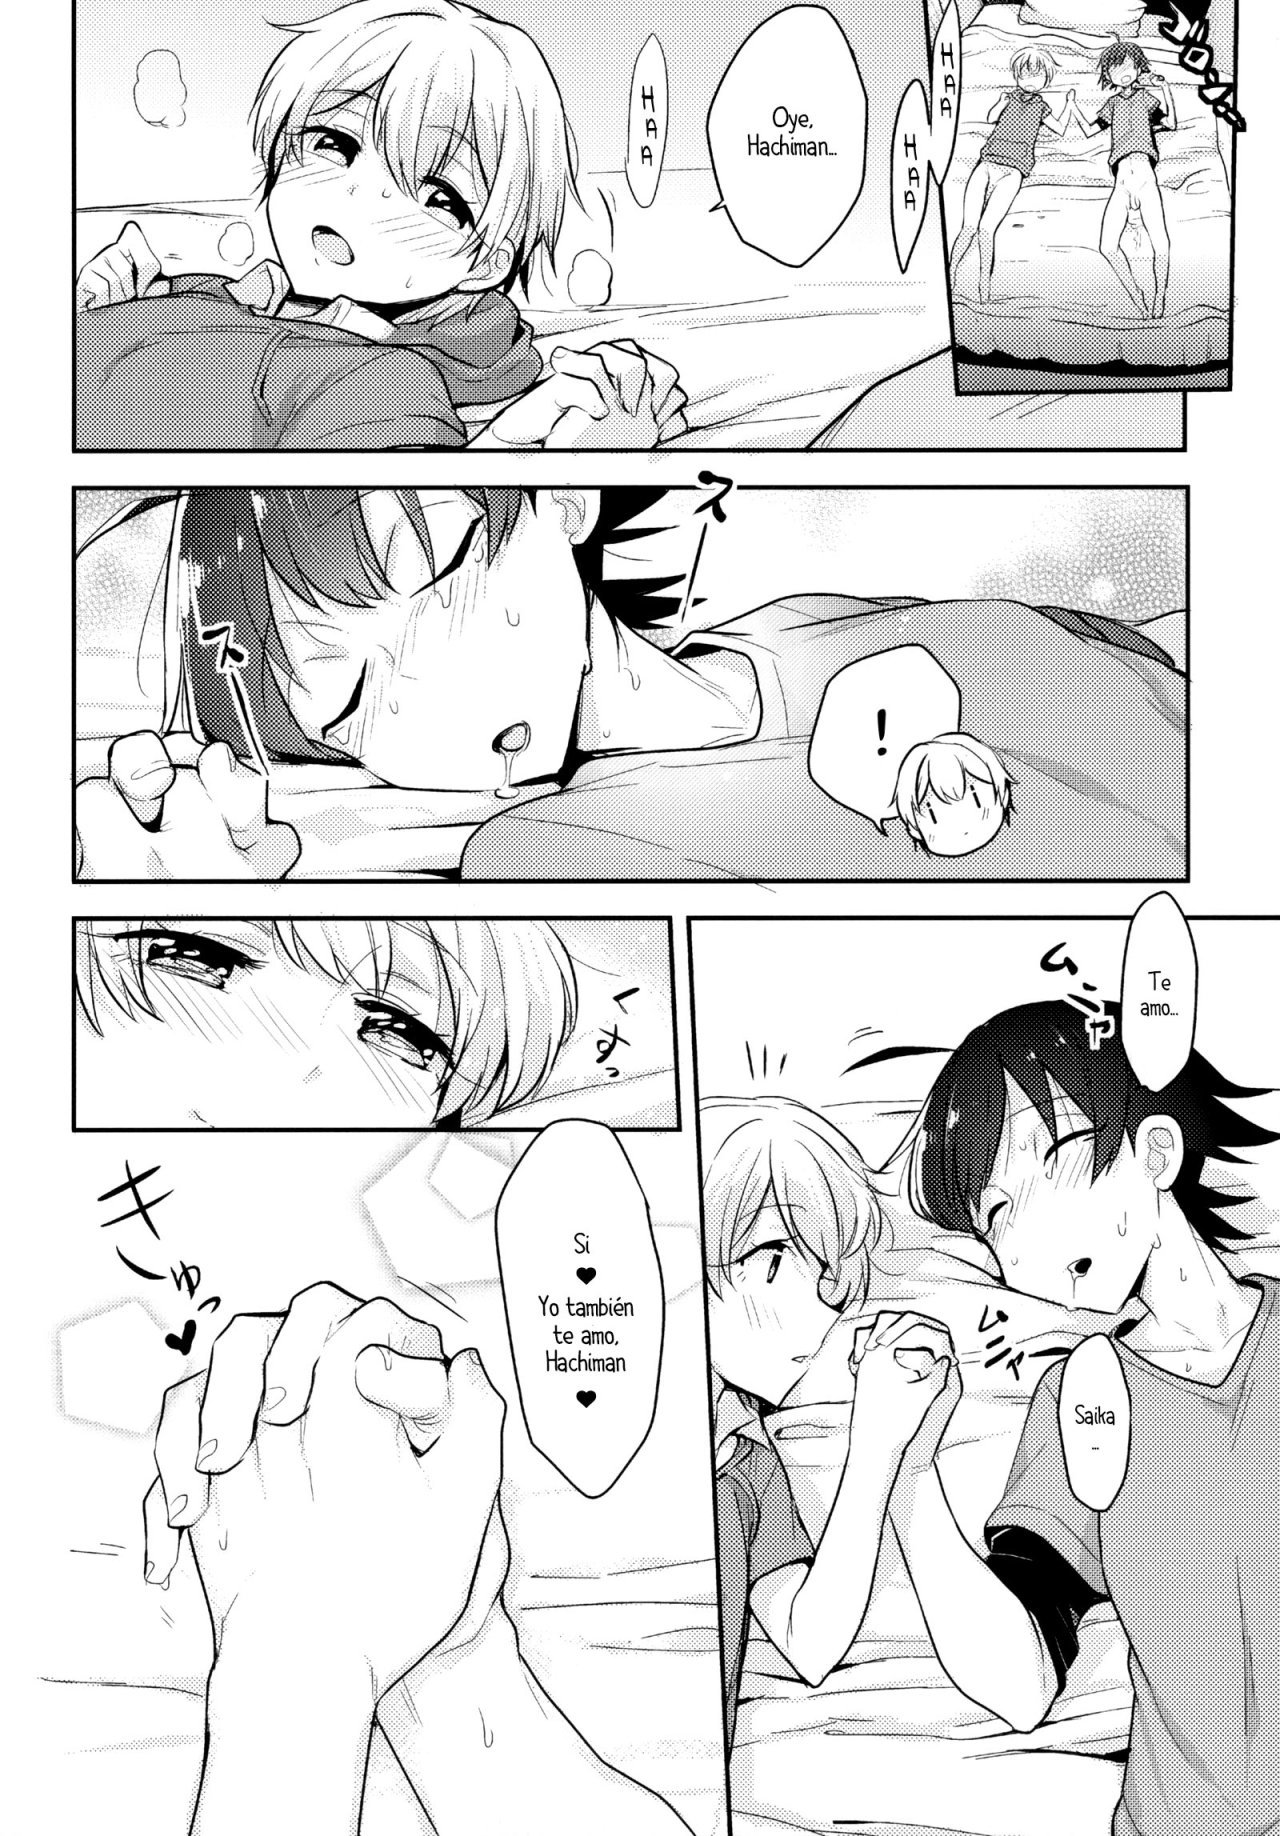 Cute Angel Totsuka Turns Hachiman Into His Bitch With His Elephant Cock - extra 2 - 20